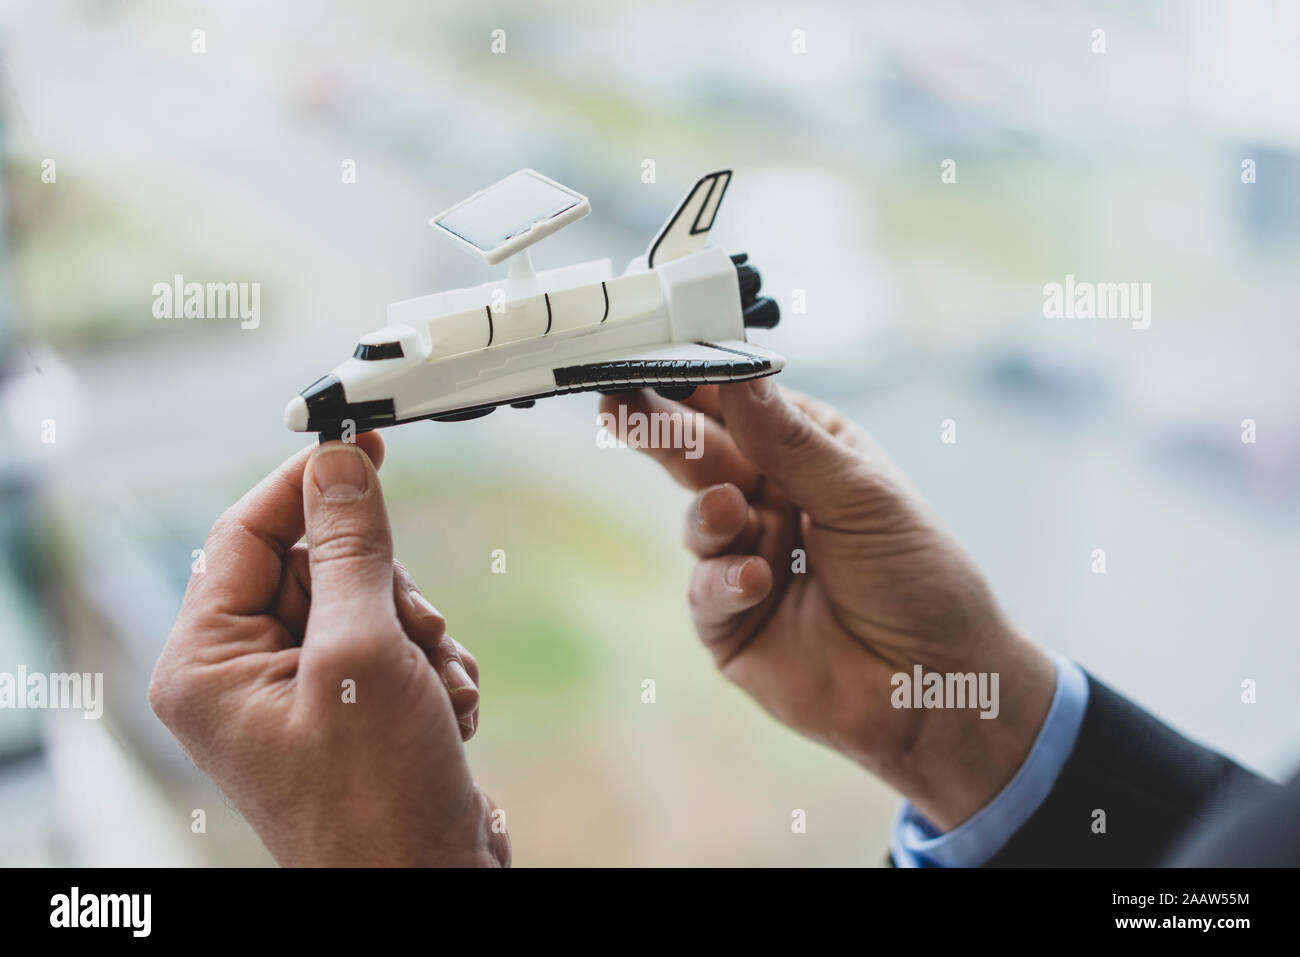 Close-up of bussinessman holding space shuttle model Stock Photo